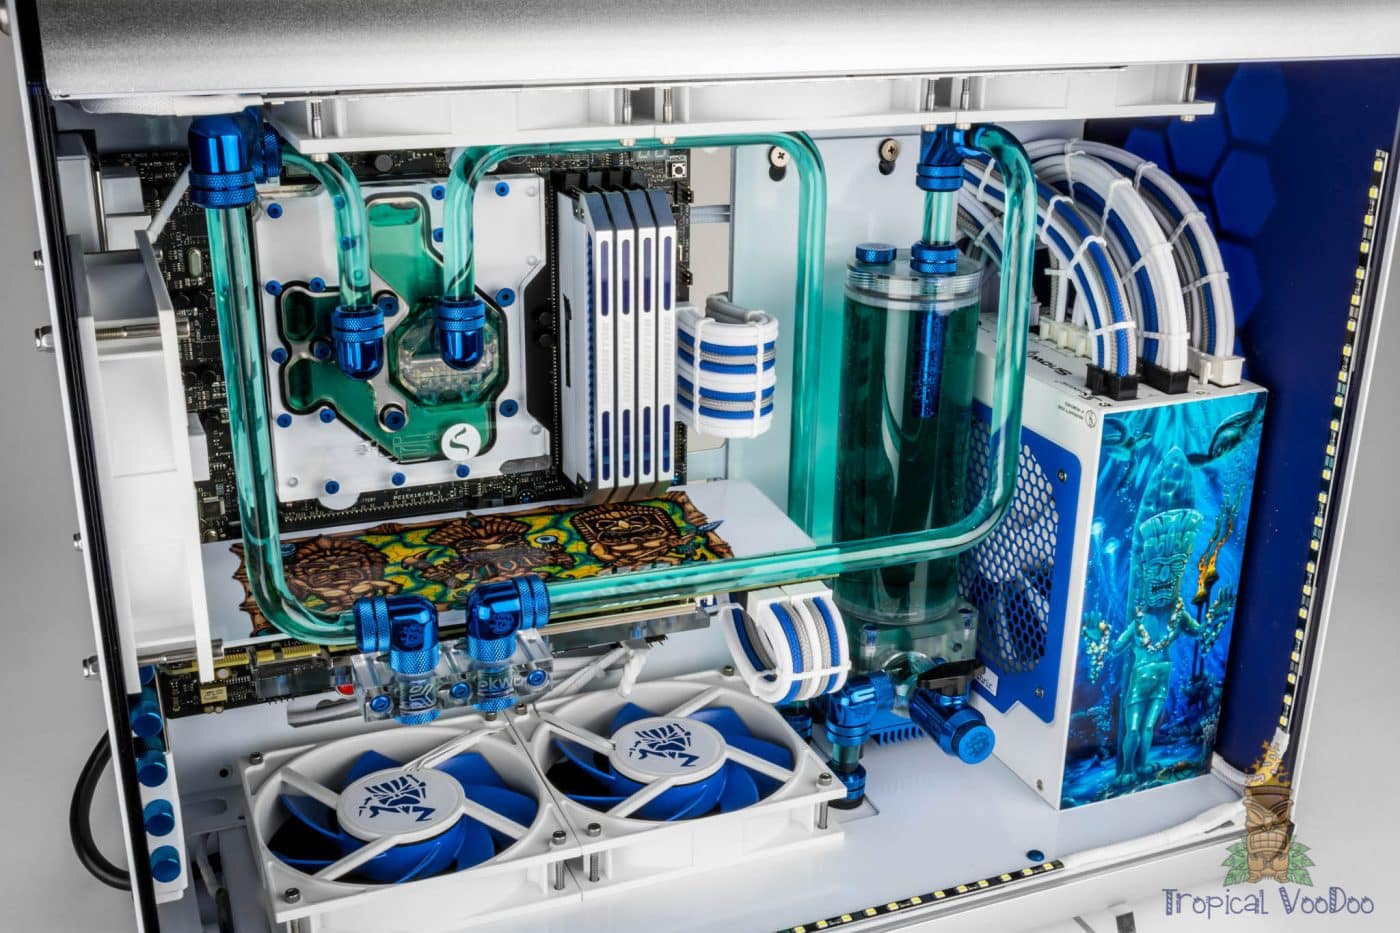 Case Mod Friday: Tropical Voodoo